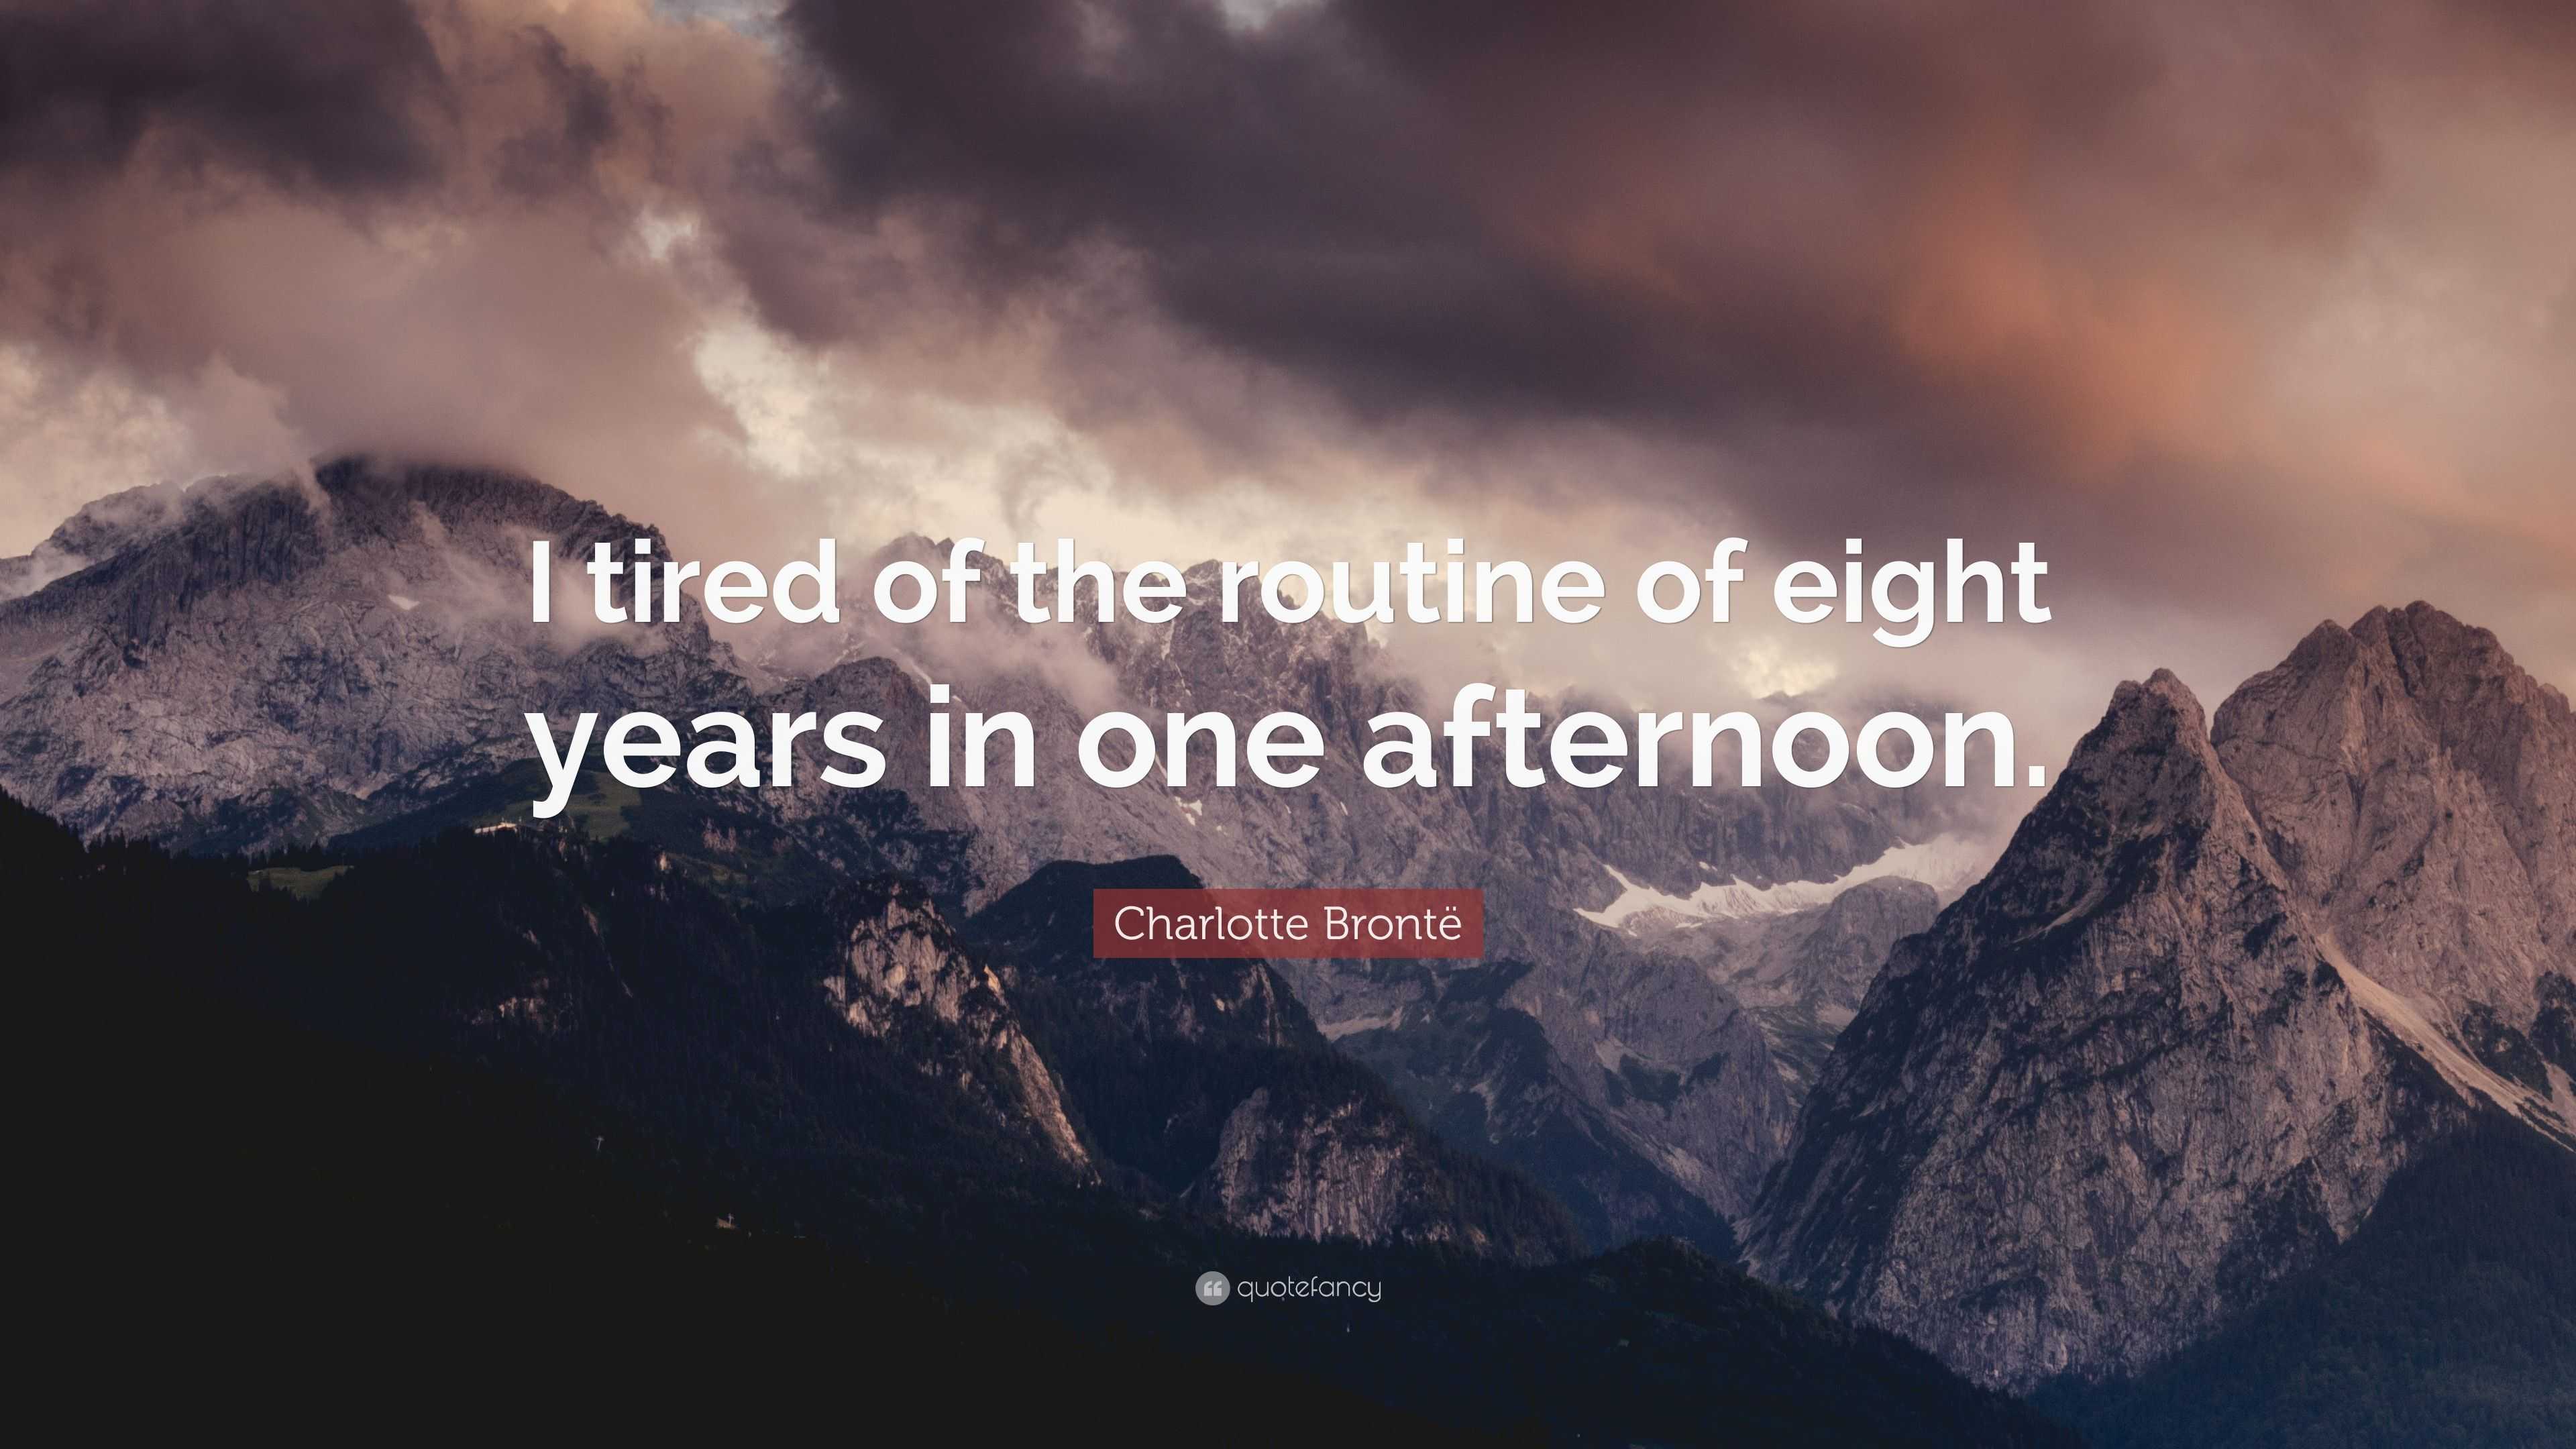 20 quotes on life by Charlotte Bronte on her 201st birthday